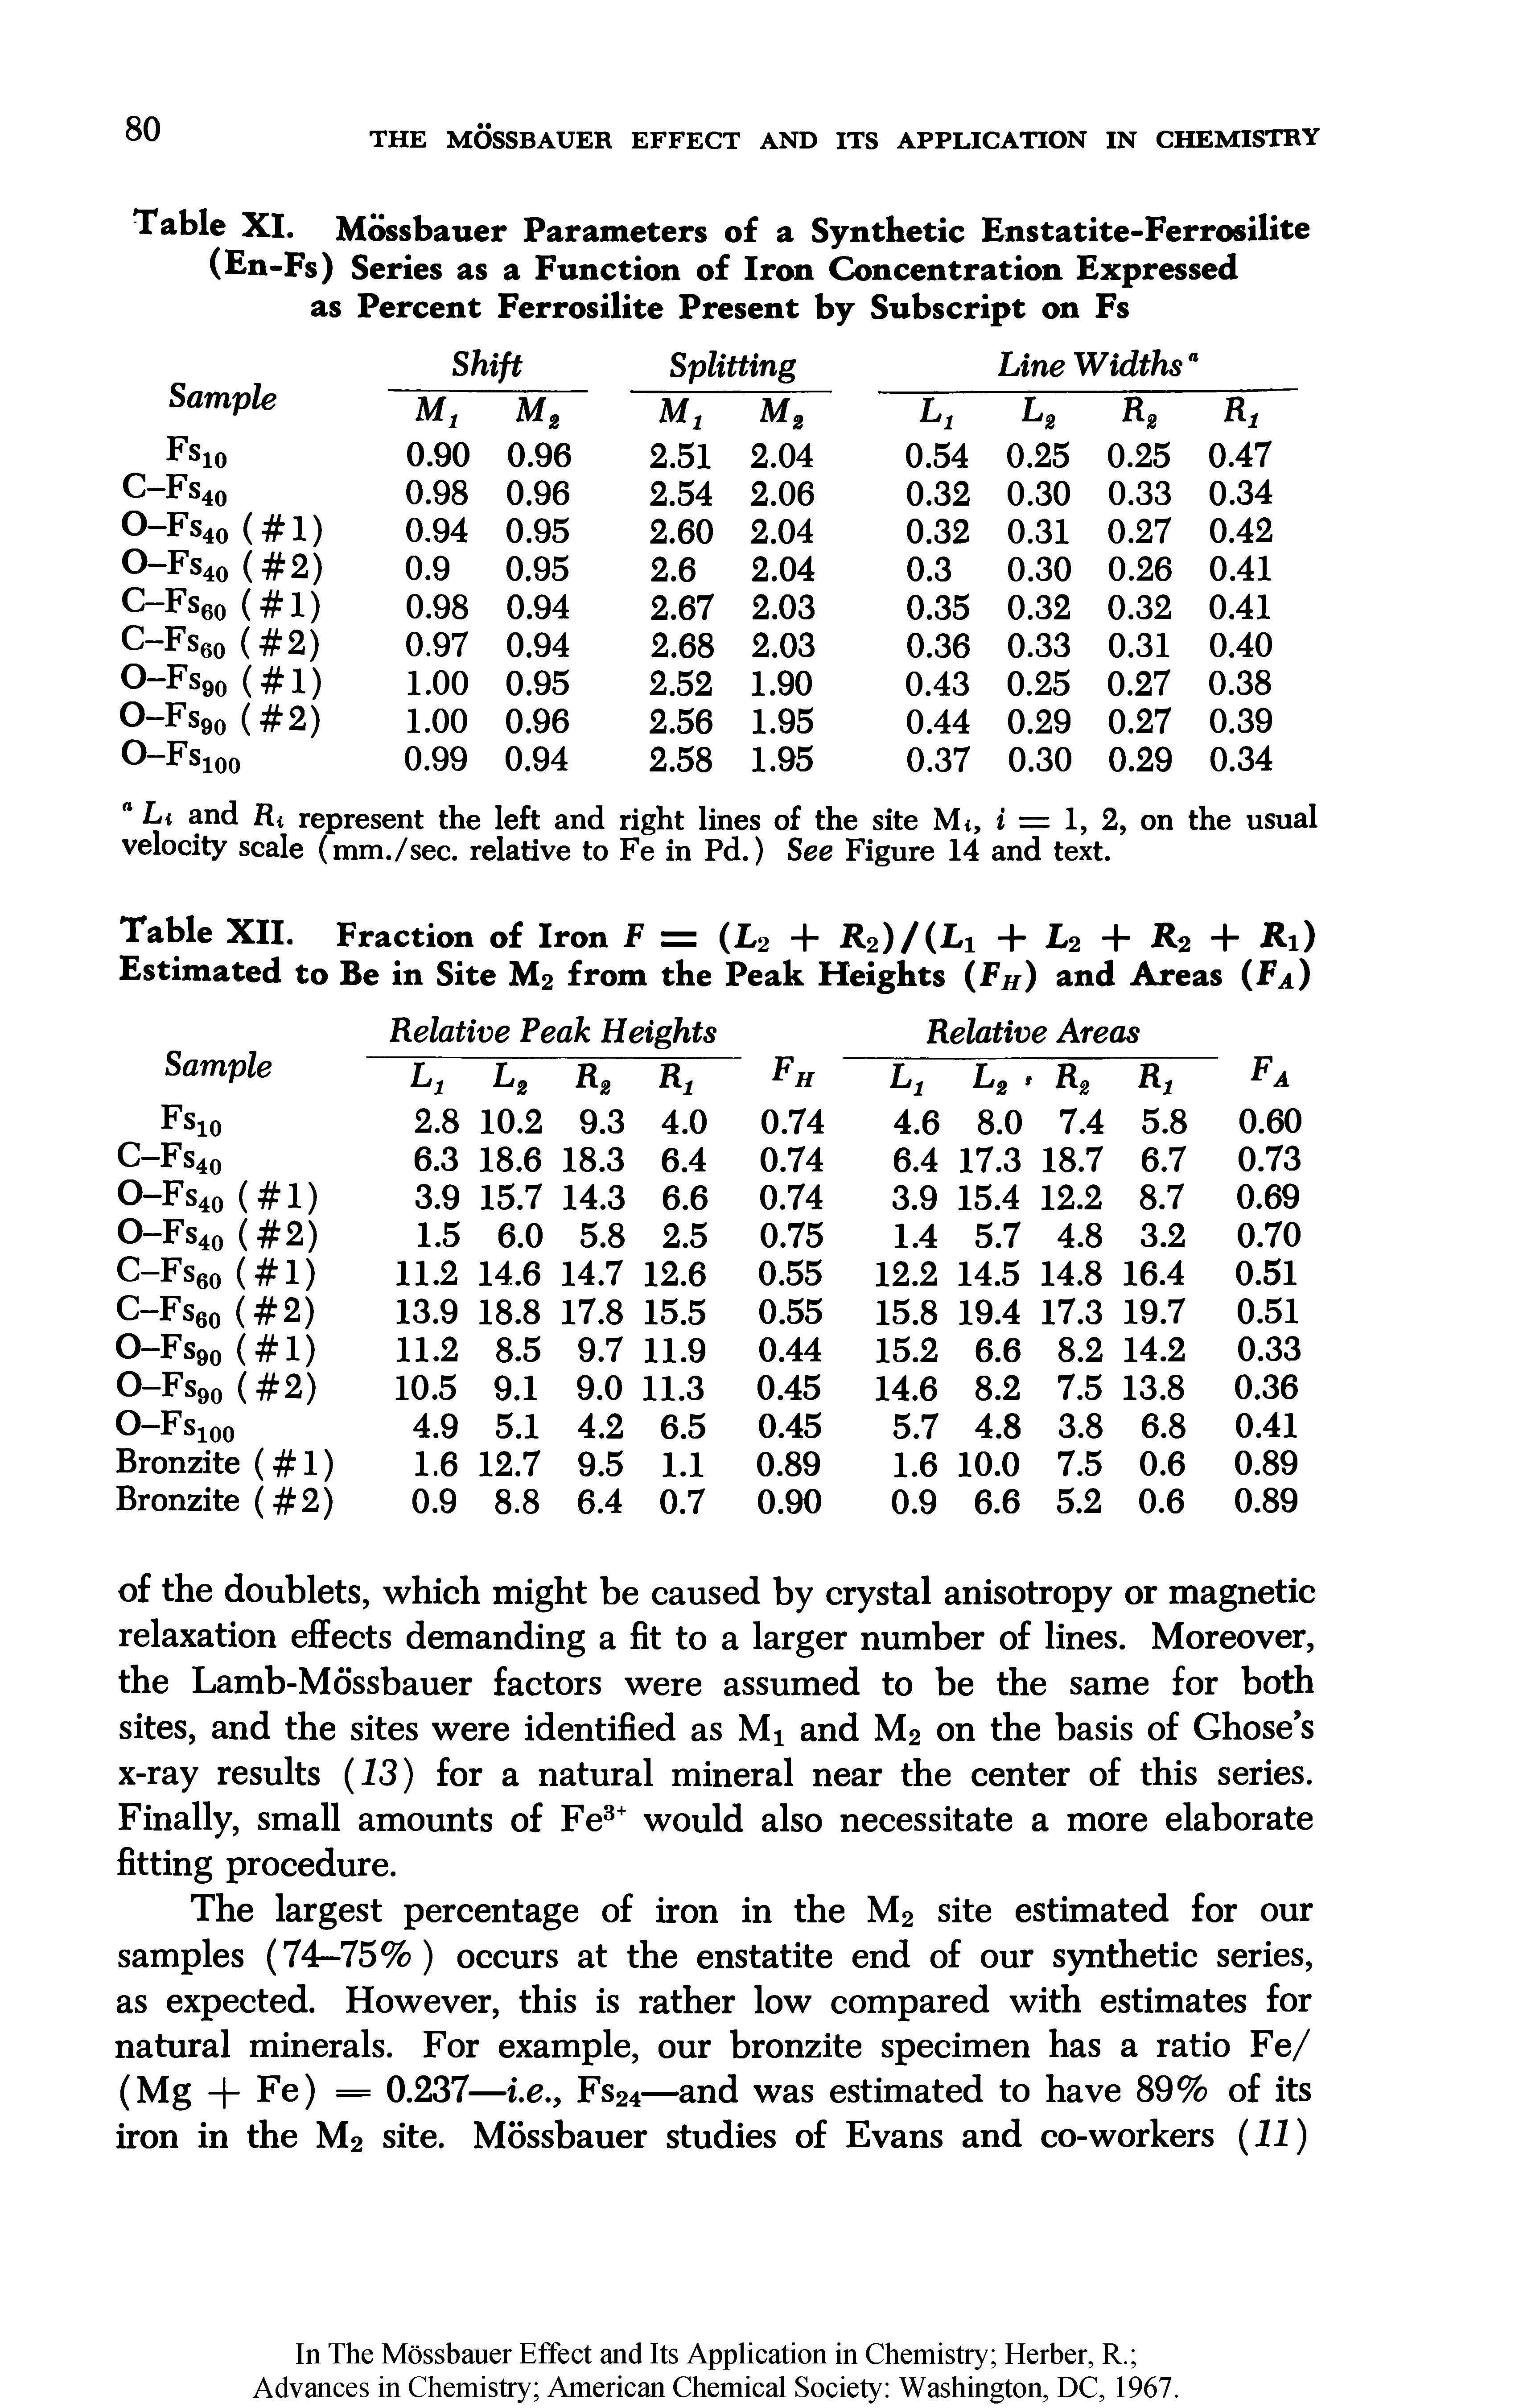 Table XI. Mossbauer Parameters of a Synthetic Enstatite-Ferrosilite ( n-Fs) Series as a Function of Iron Concentration Expressed as Percent Ferrosilite Present by Subscript on Fs...